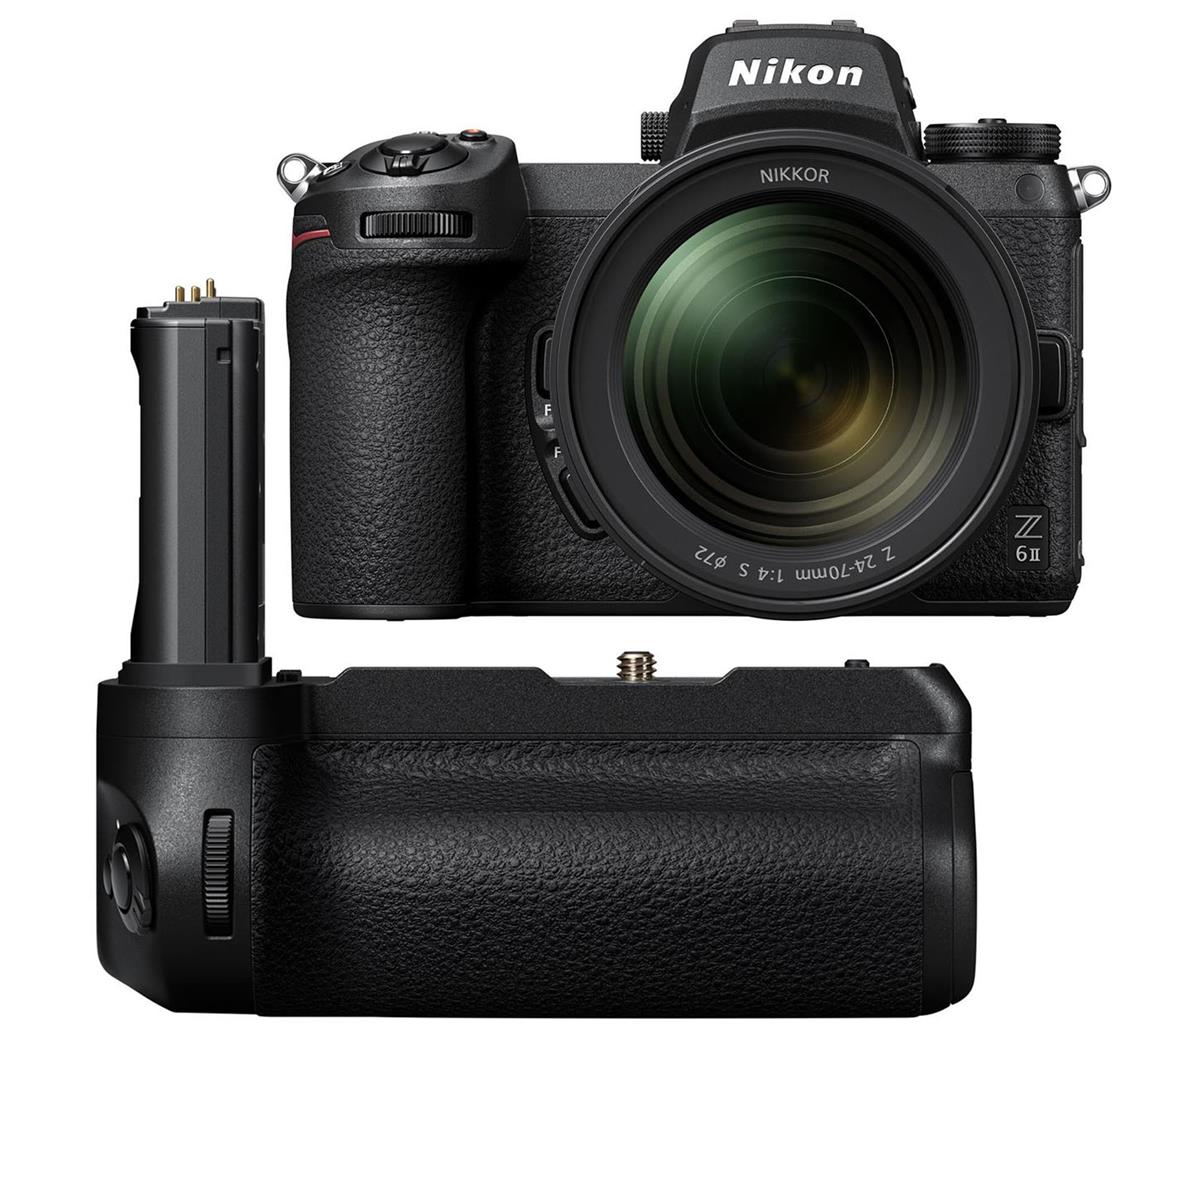 Image of Nikon Z 6II Mirrorless Camera with 24-70mm f/4 Lens and MB-N11 Battery Grip